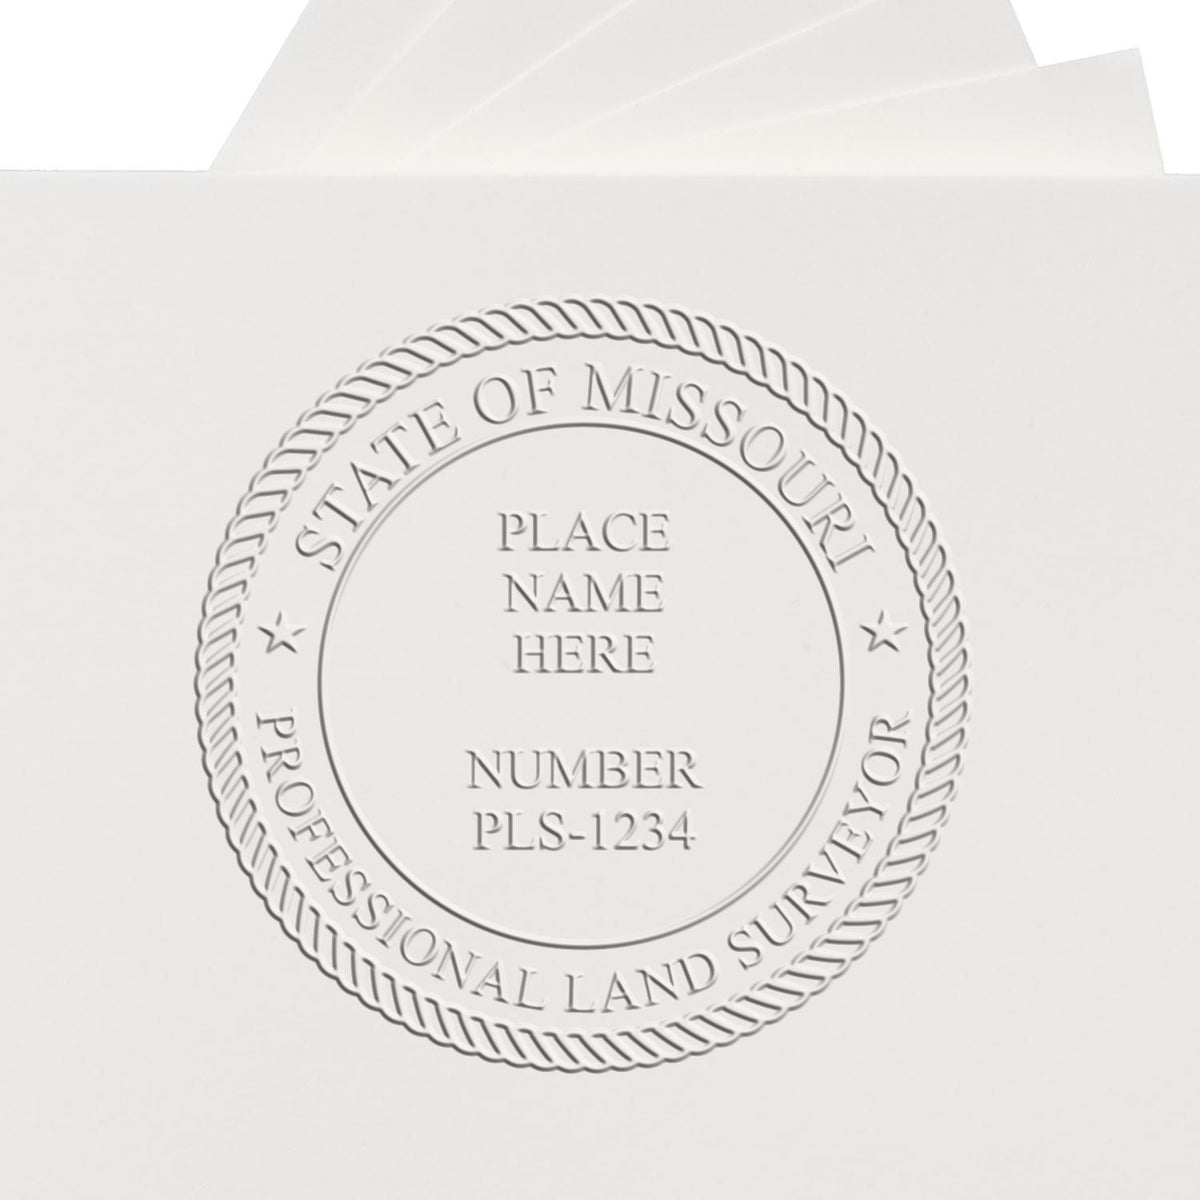 The Long Reach Missouri Land Surveyor Seal stamp impression comes to life with a crisp, detailed photo on paper - showcasing true professional quality.